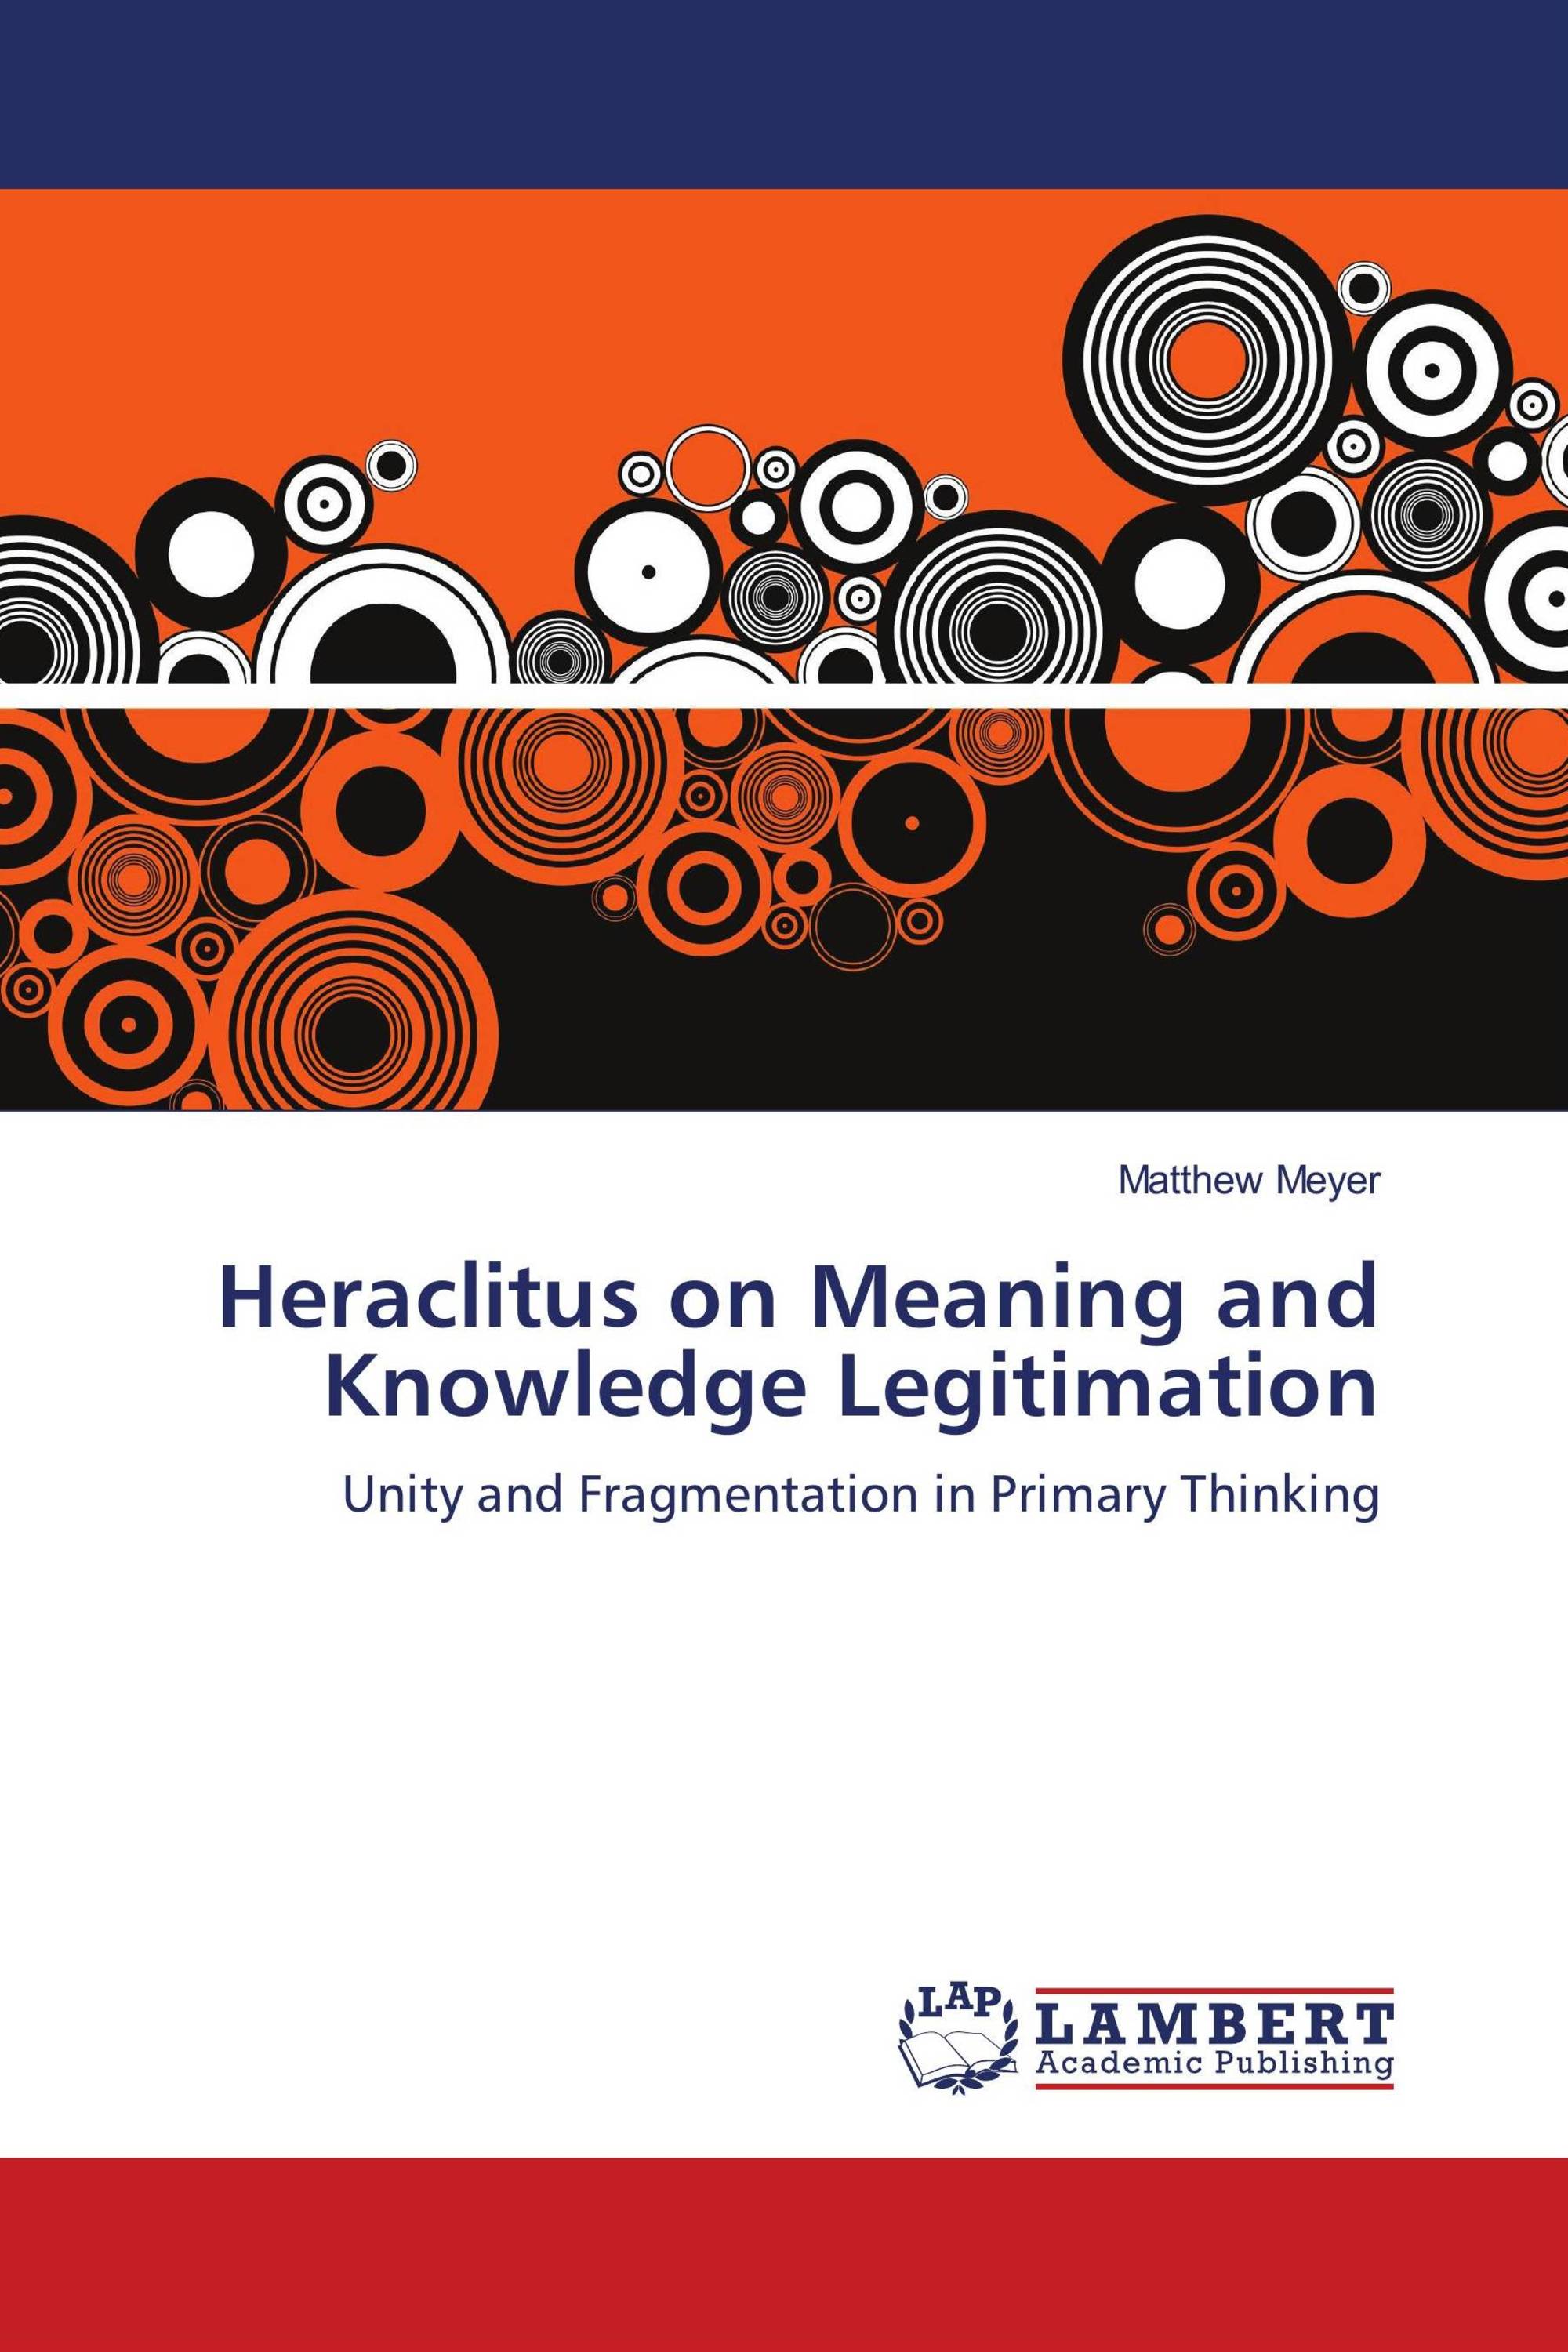 Heraclitus on Meaning and Knowledge Legitimation